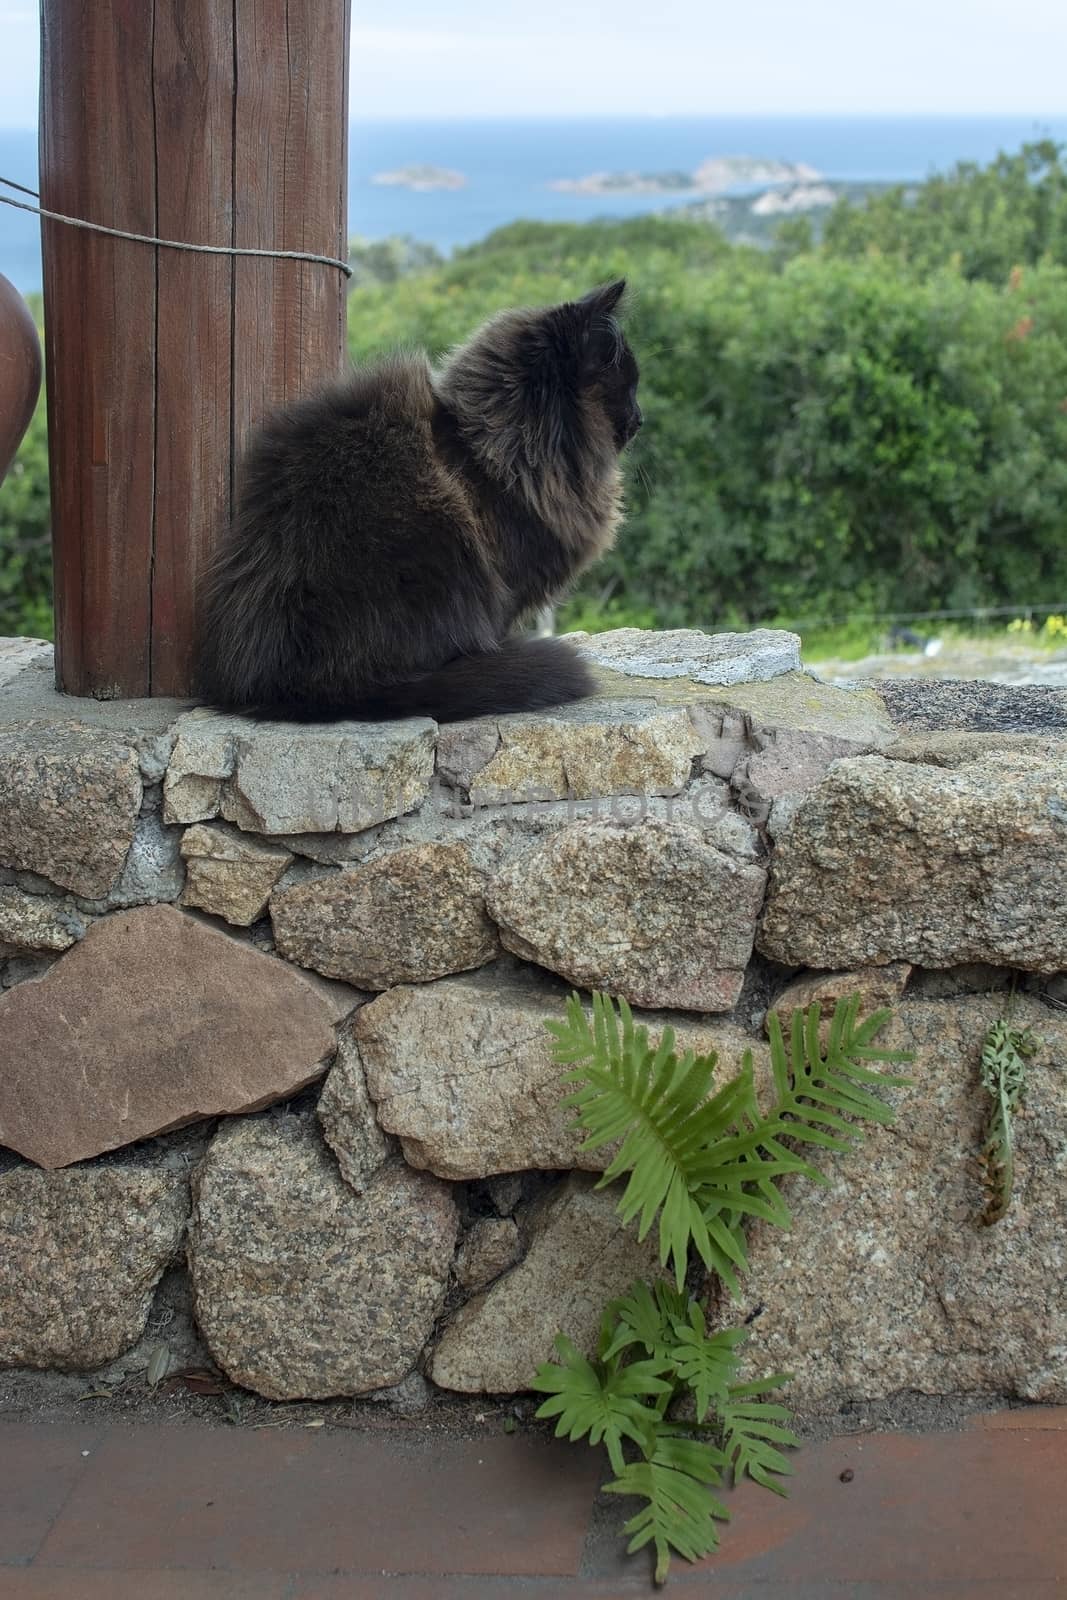 Dark brown cat sits on stone wall with sea view over the macchia in Sardinia, Italy.